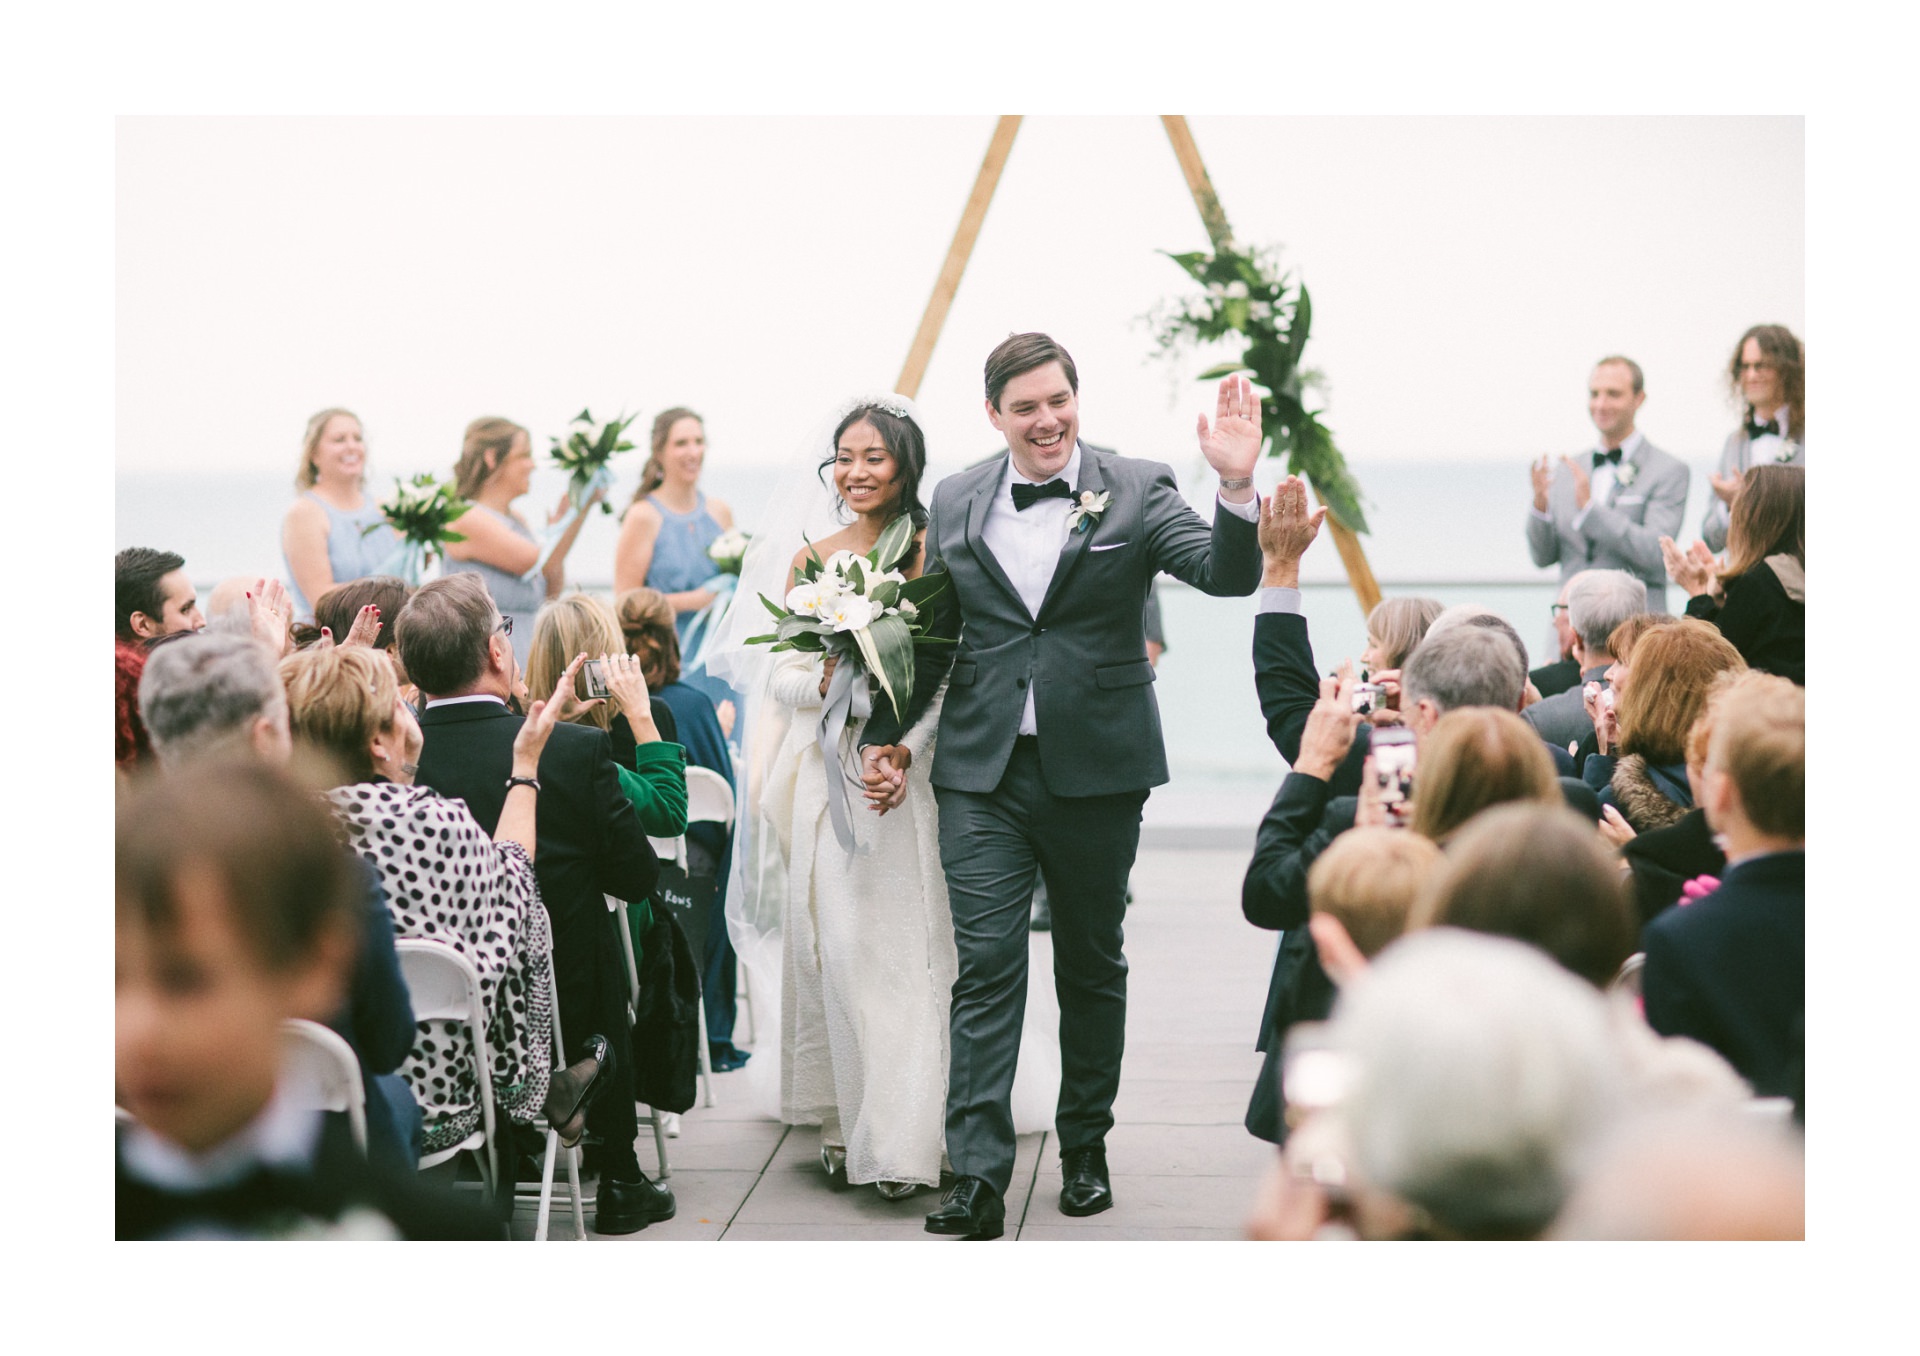 Wedding at Ernst and Young Rooftop in Downtown Cleveland 2 21.jpg